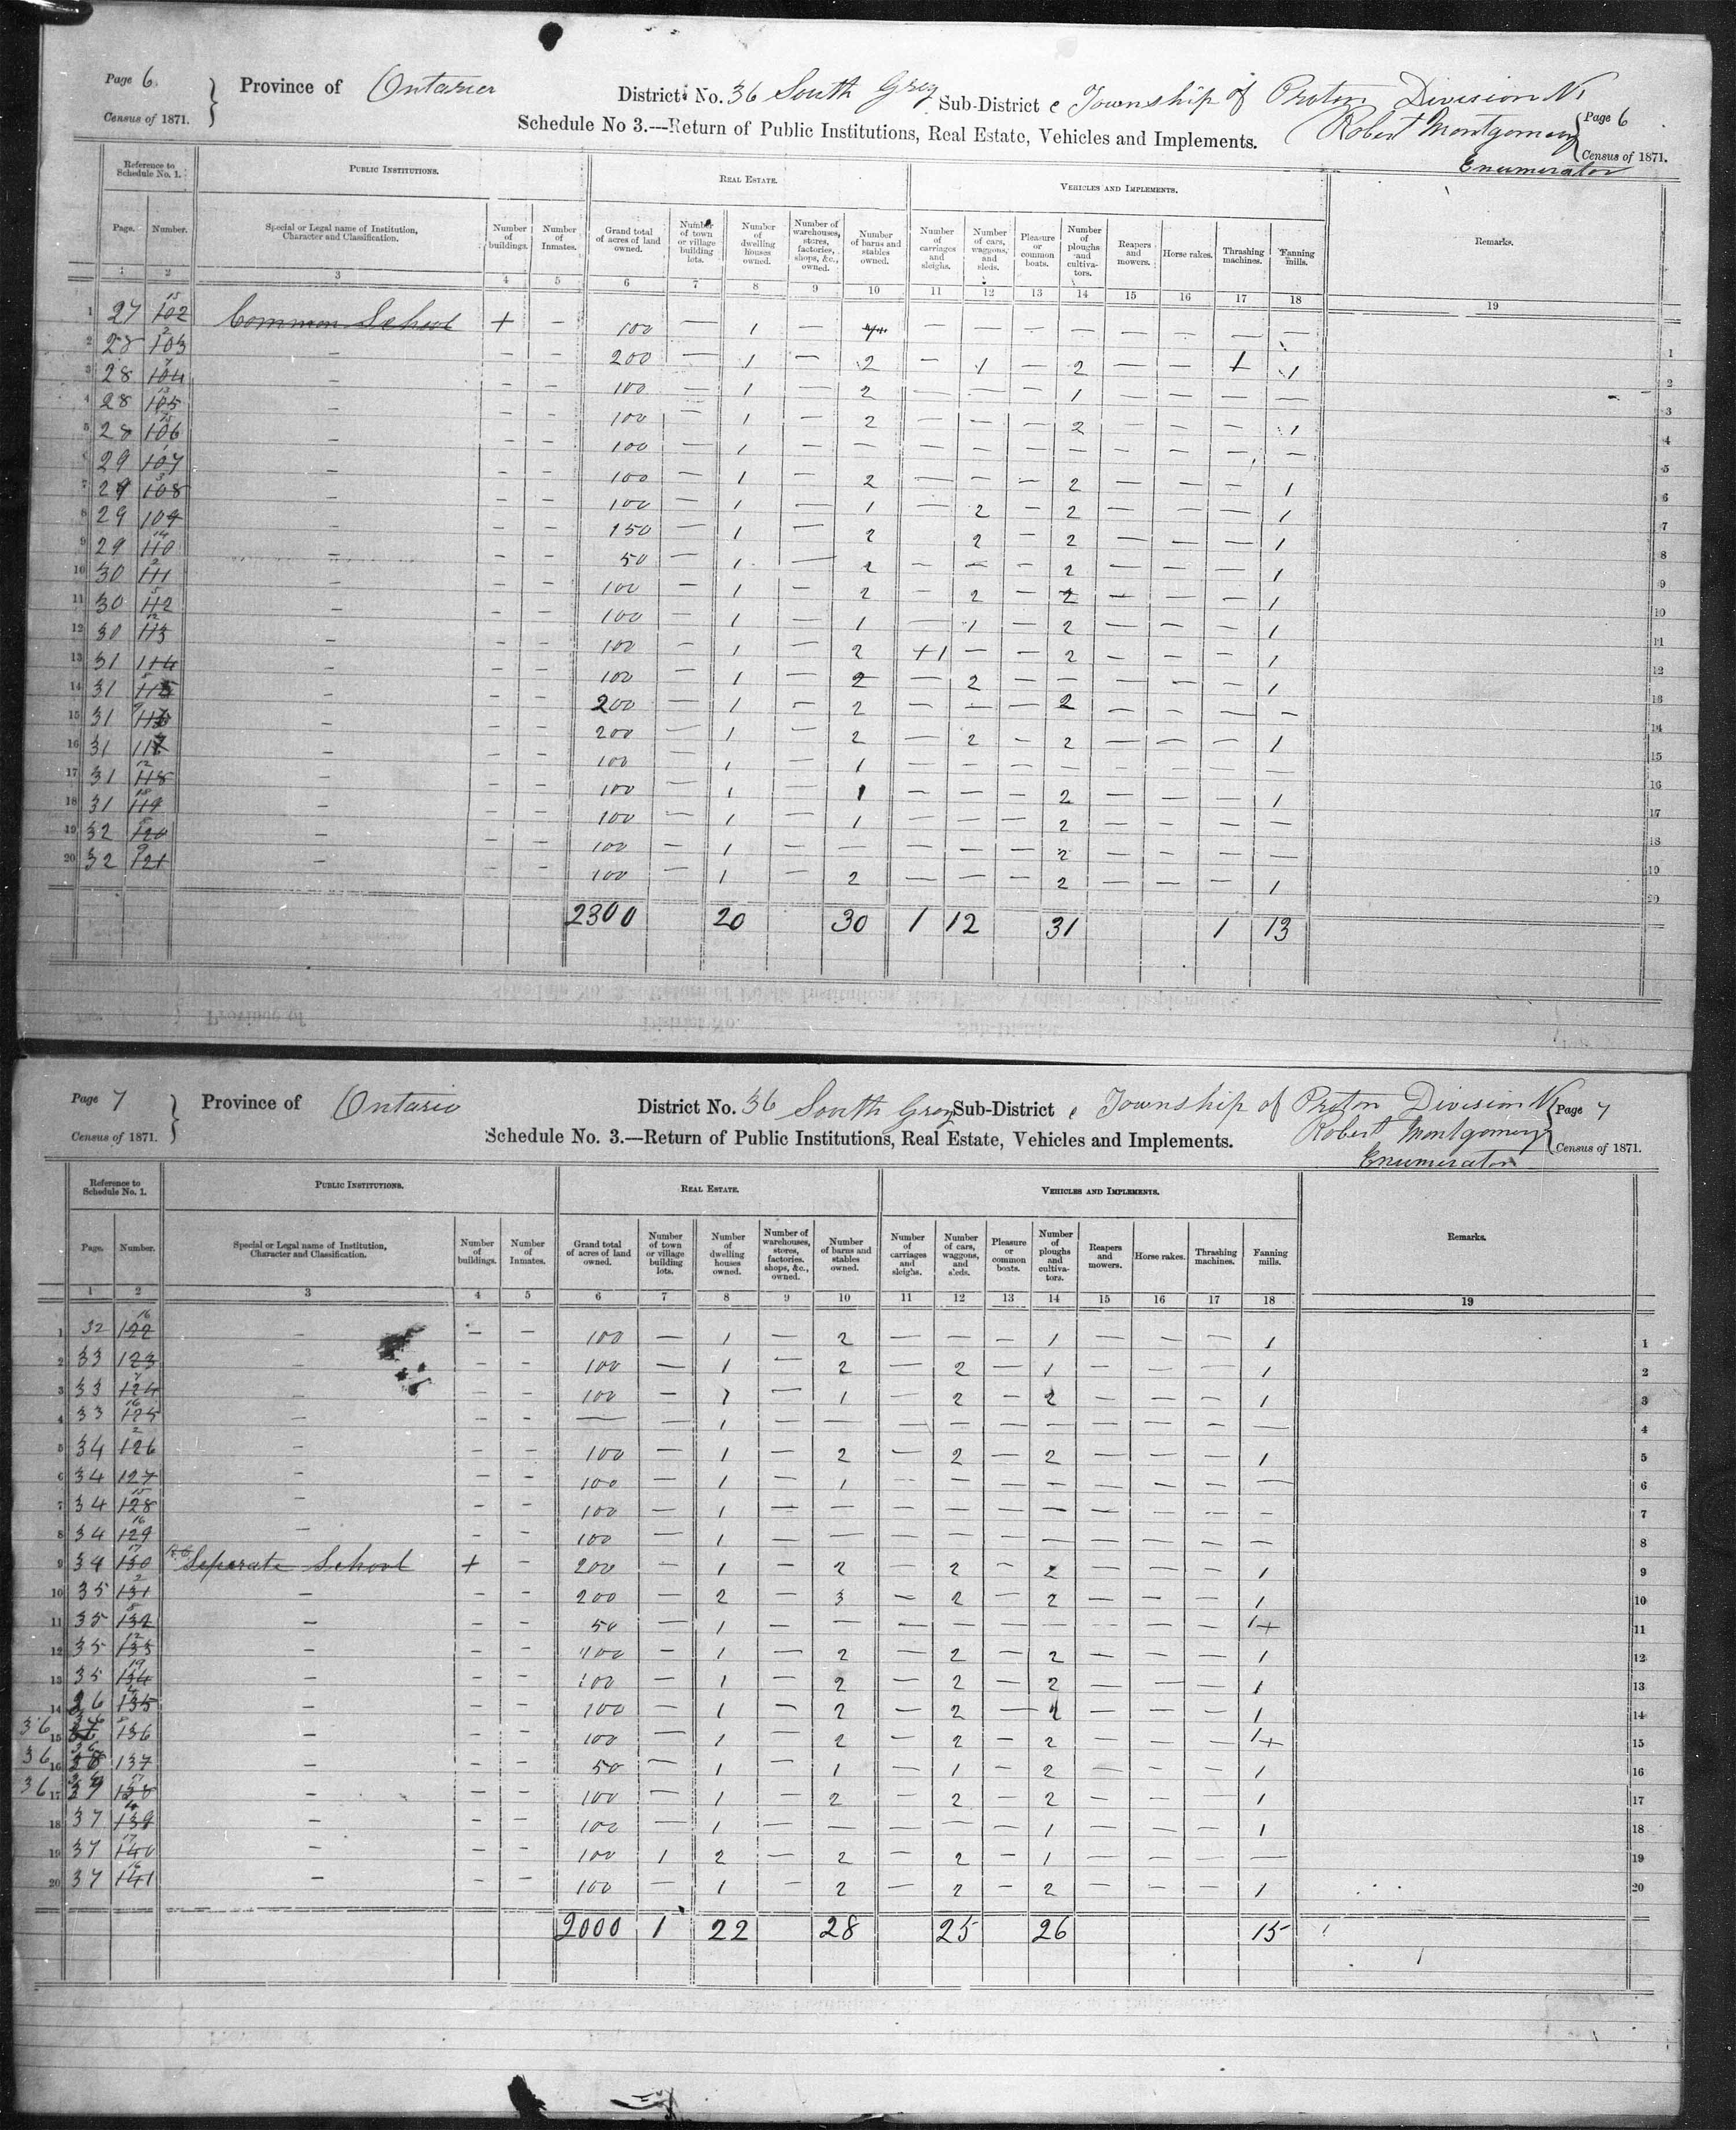 Title: Census of Canada, 1871 - Mikan Number: 142105 - Microform: c-9951